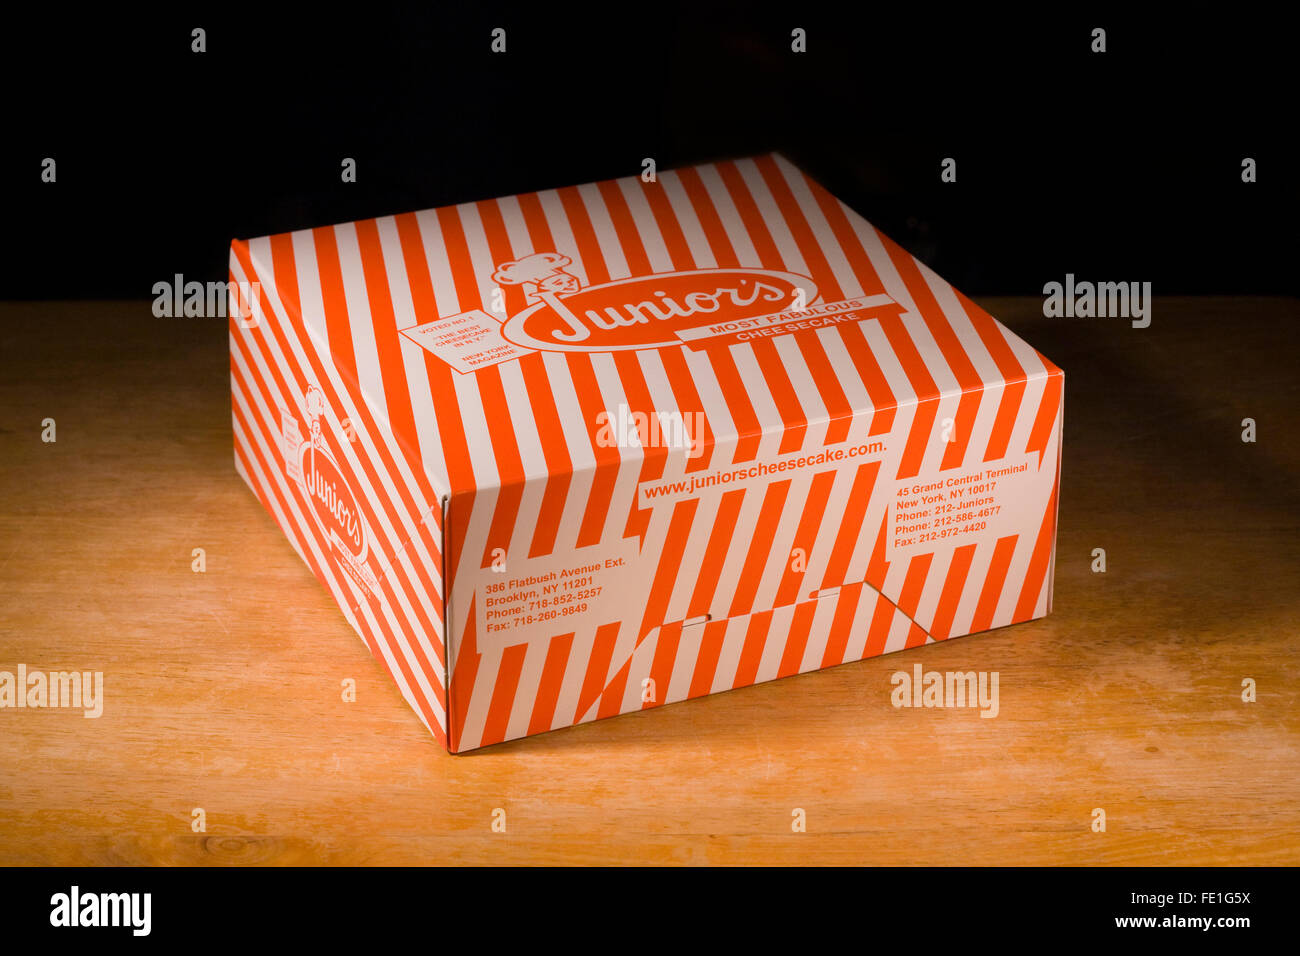 An iconic orange striped Junior's Cheesecake Box from their Brooklyn flagship restaurant in New York City on a wooden tabletop Stock Photo